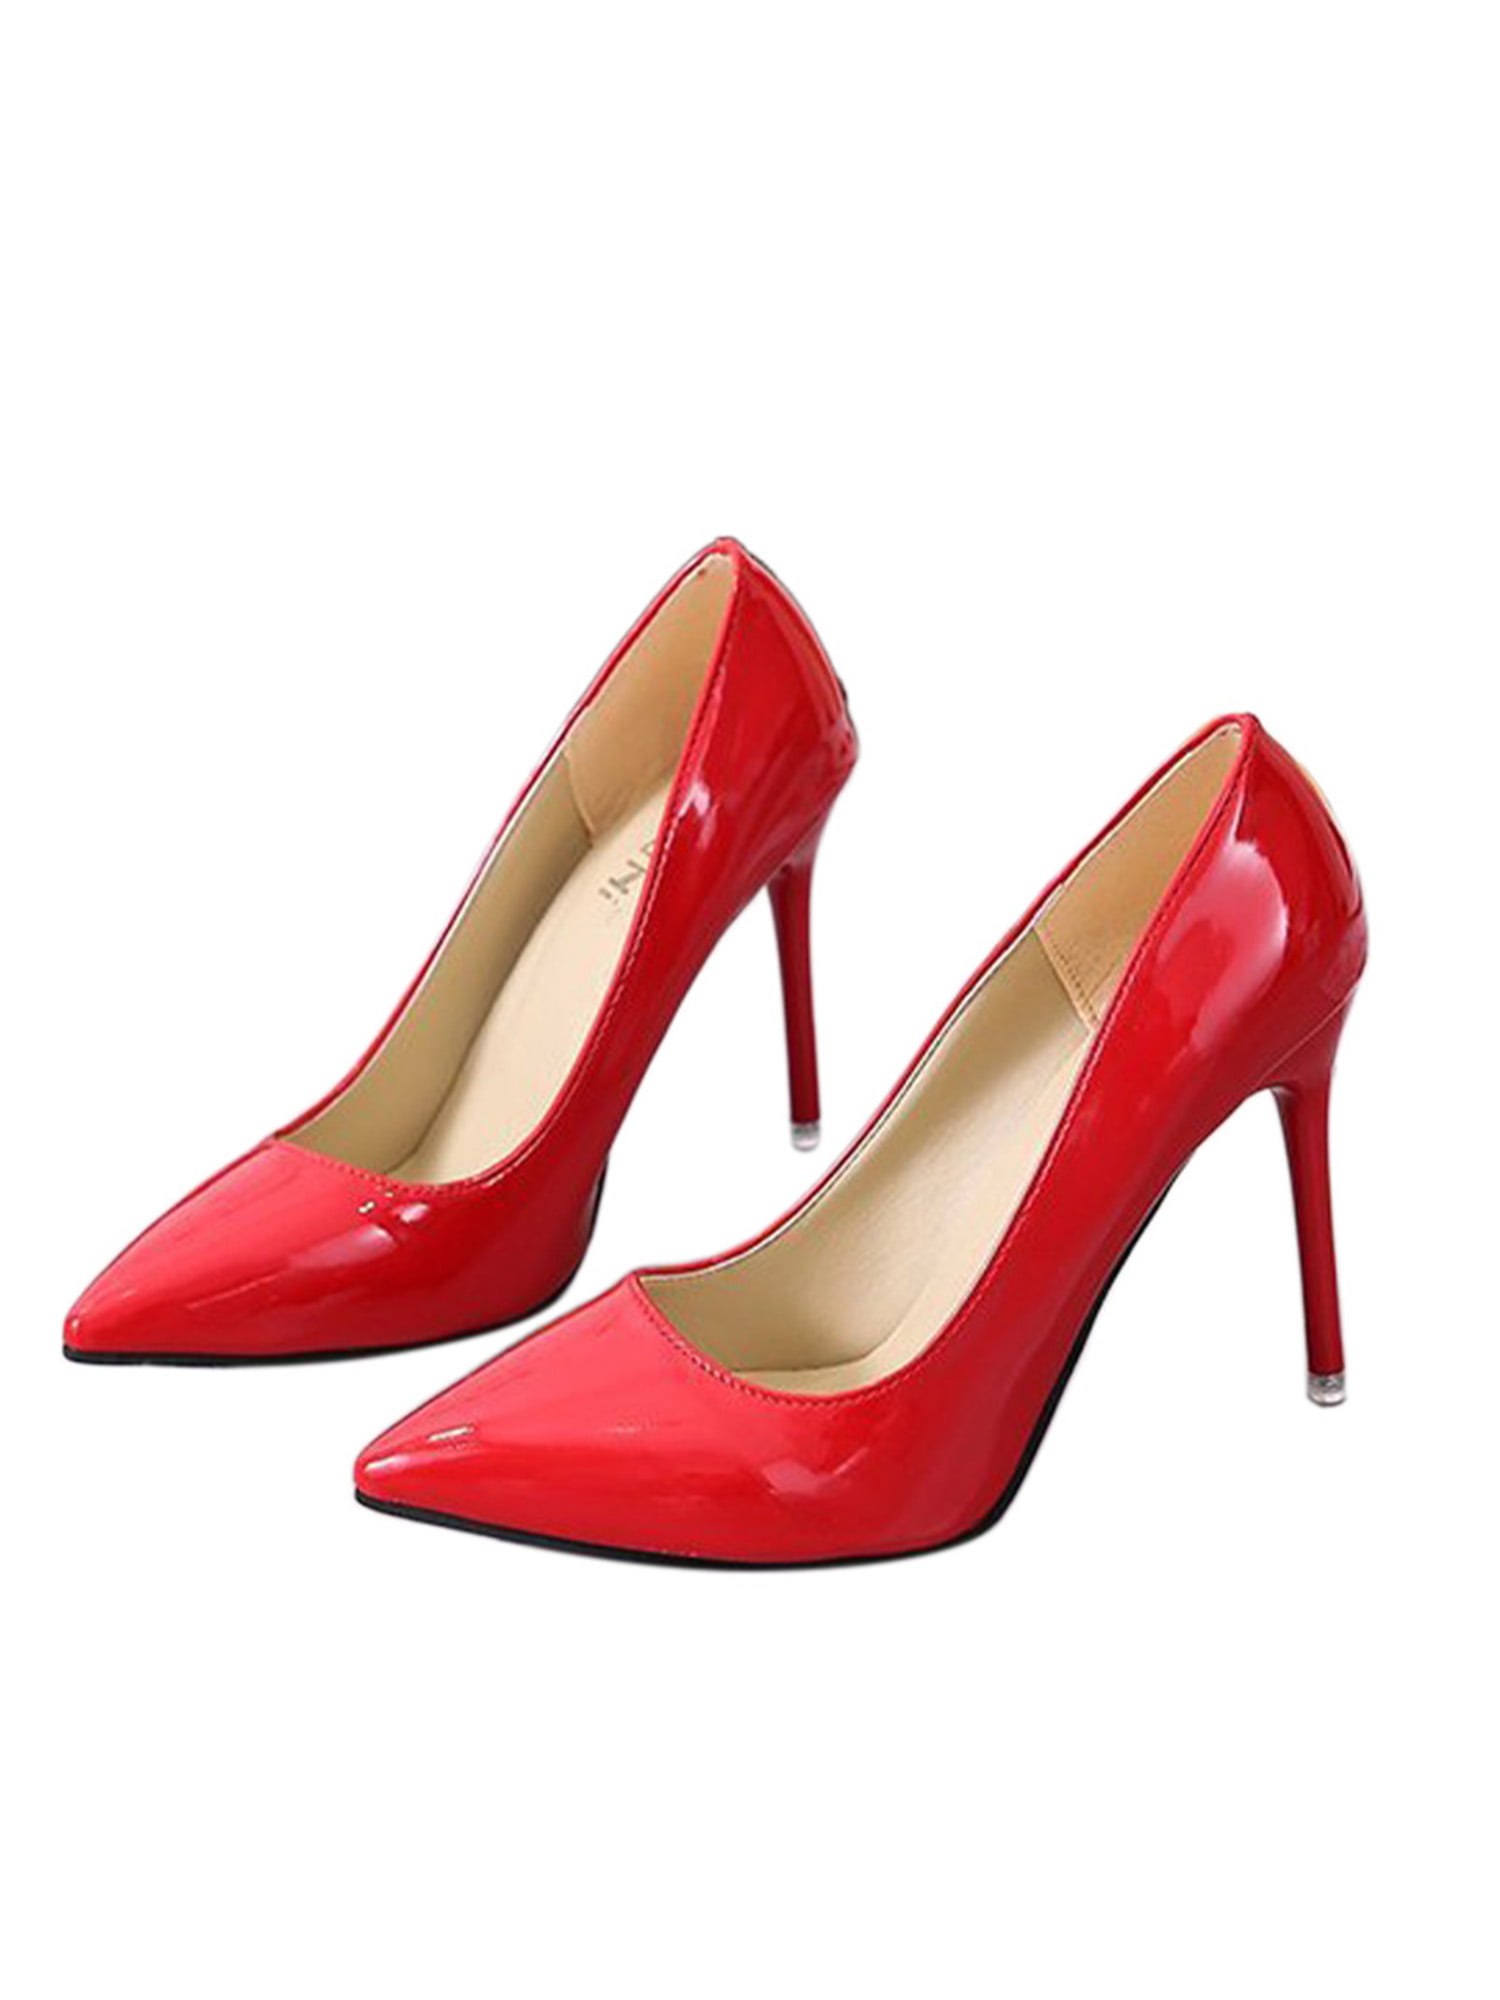 high heels shallow mouth patent leather| Alibaba.com